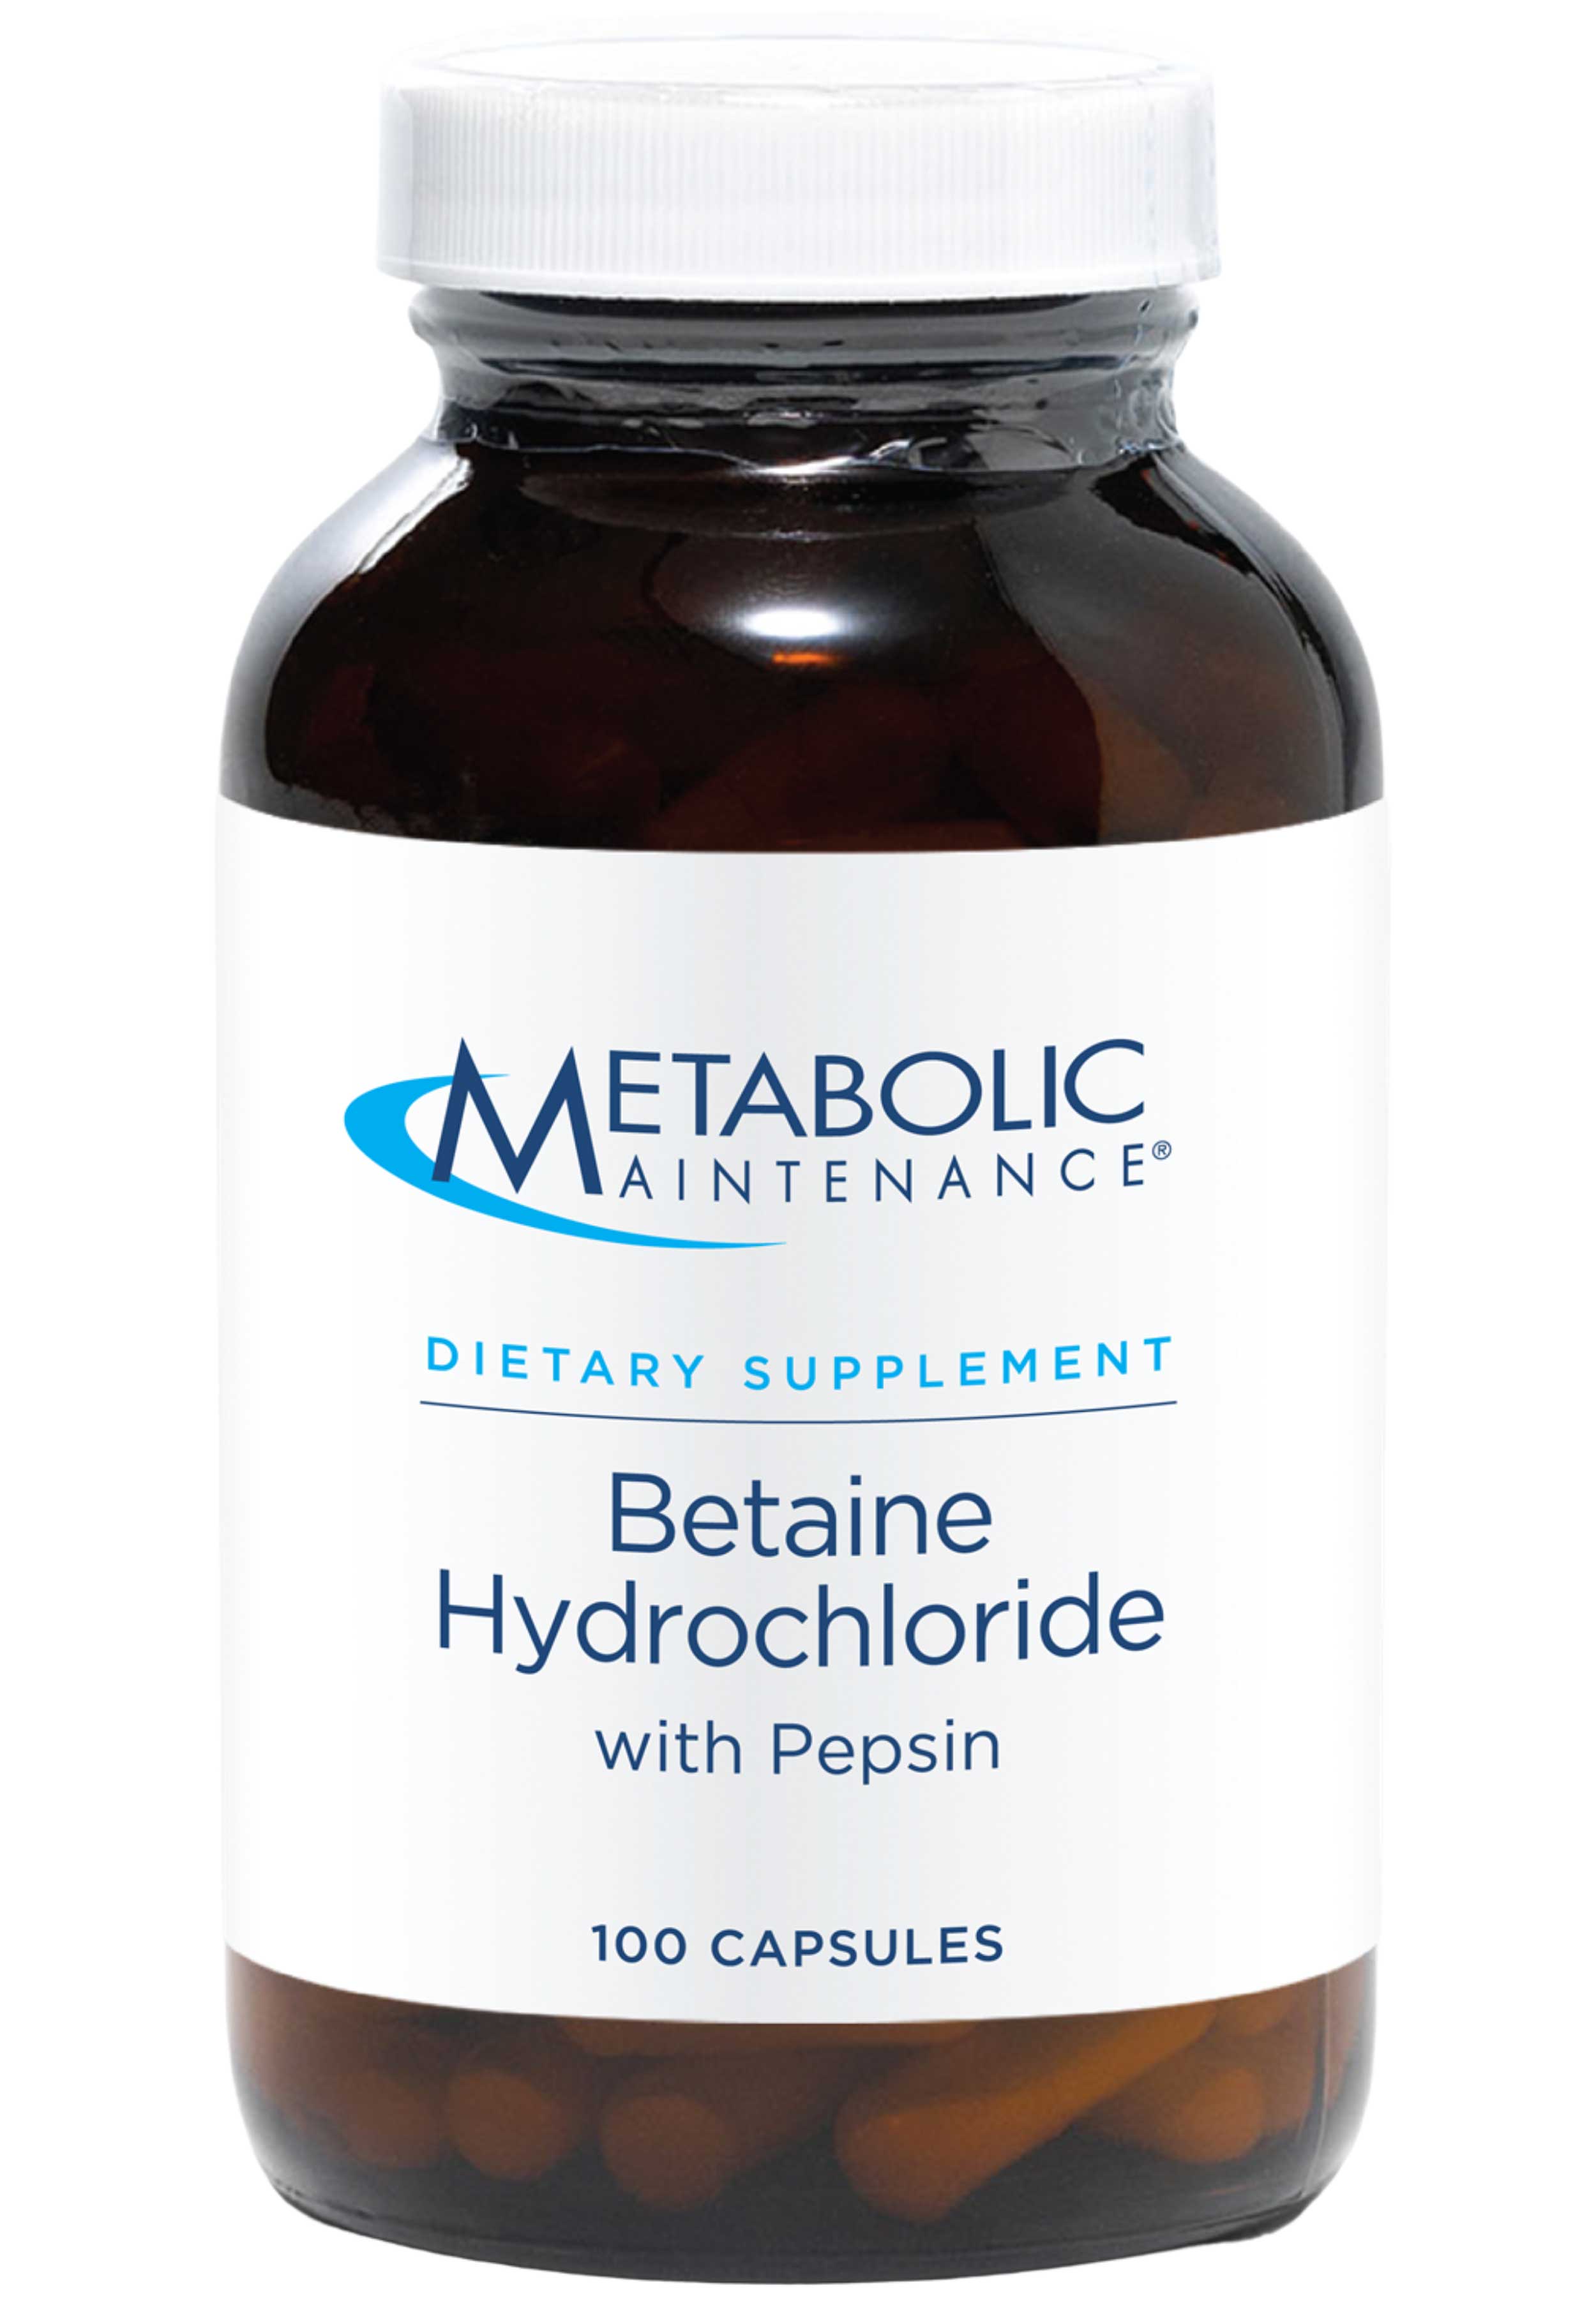 Metabolic Maintenance Betaine Hydrochloride with Pepsin